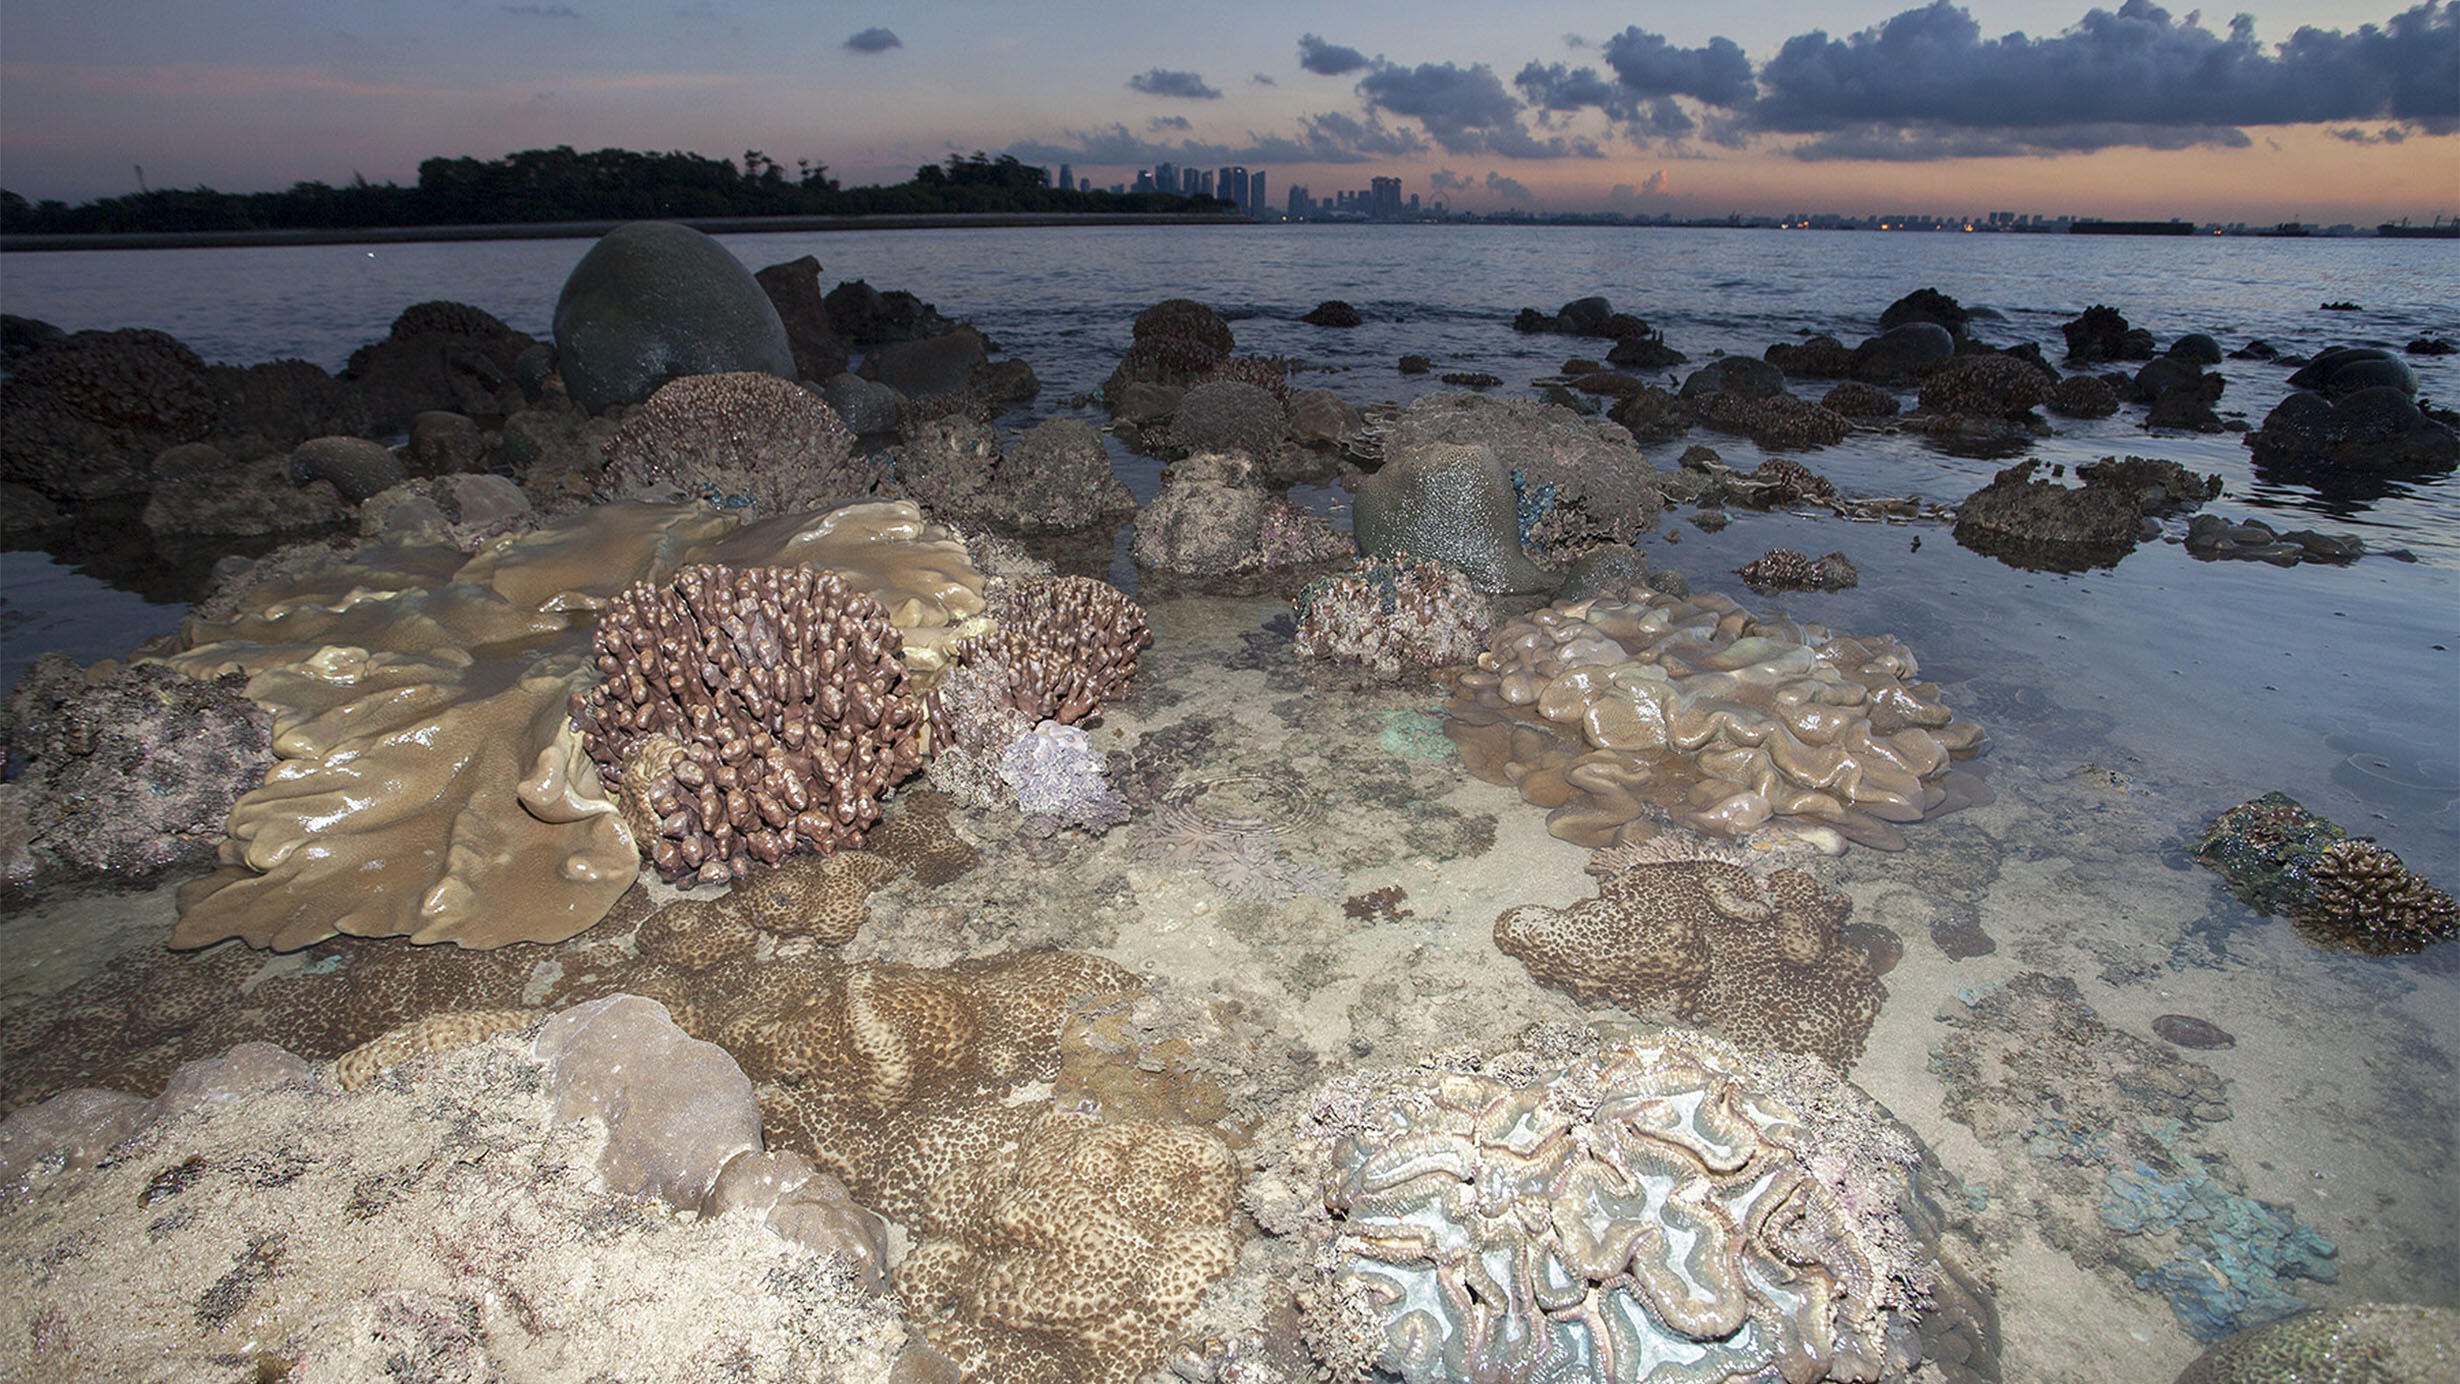 Corals that comprise the Kusu Island coral reef are visible in the foreground, with the Singapore skyline in view in the distance.